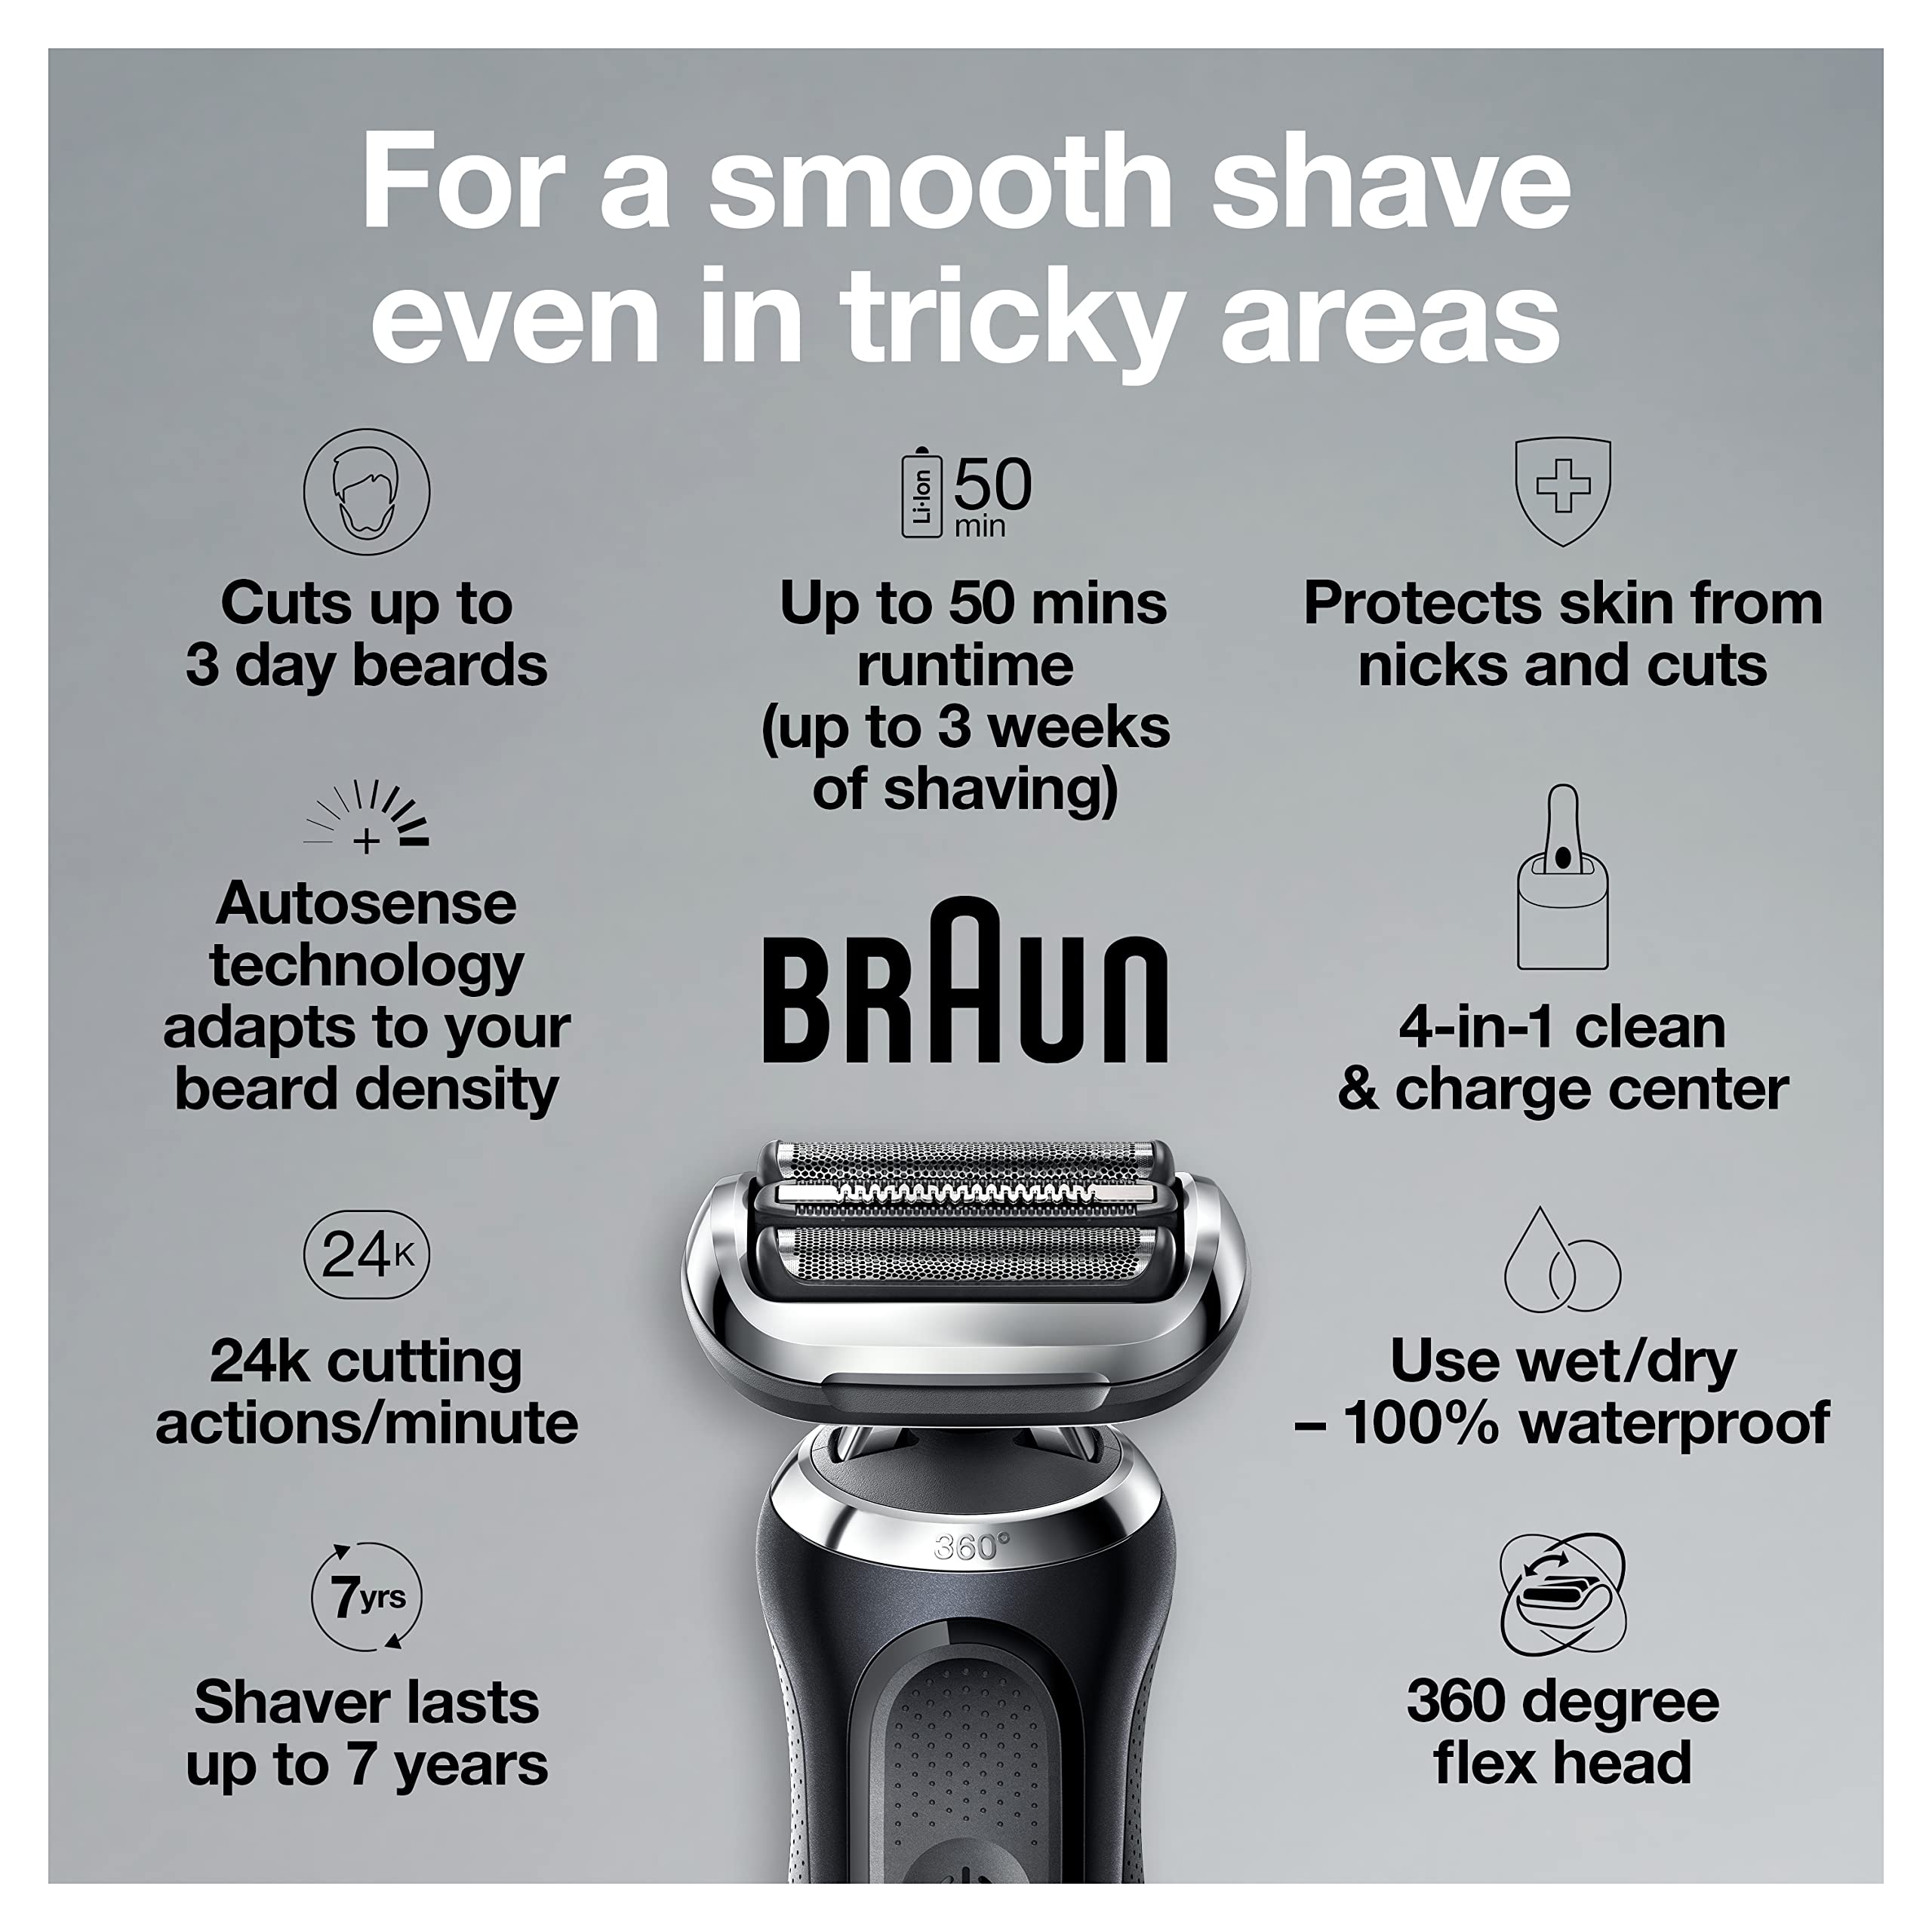 Braun Series 7 7091cc Flex Electric Razor for Men with SmartCare Center, Beard Trimmer, Stubble Beard Trimmer, Body Groomer and Exfoliating Brush Wet & Dry, Rechargeable, Cordless Foil Shaver, Black